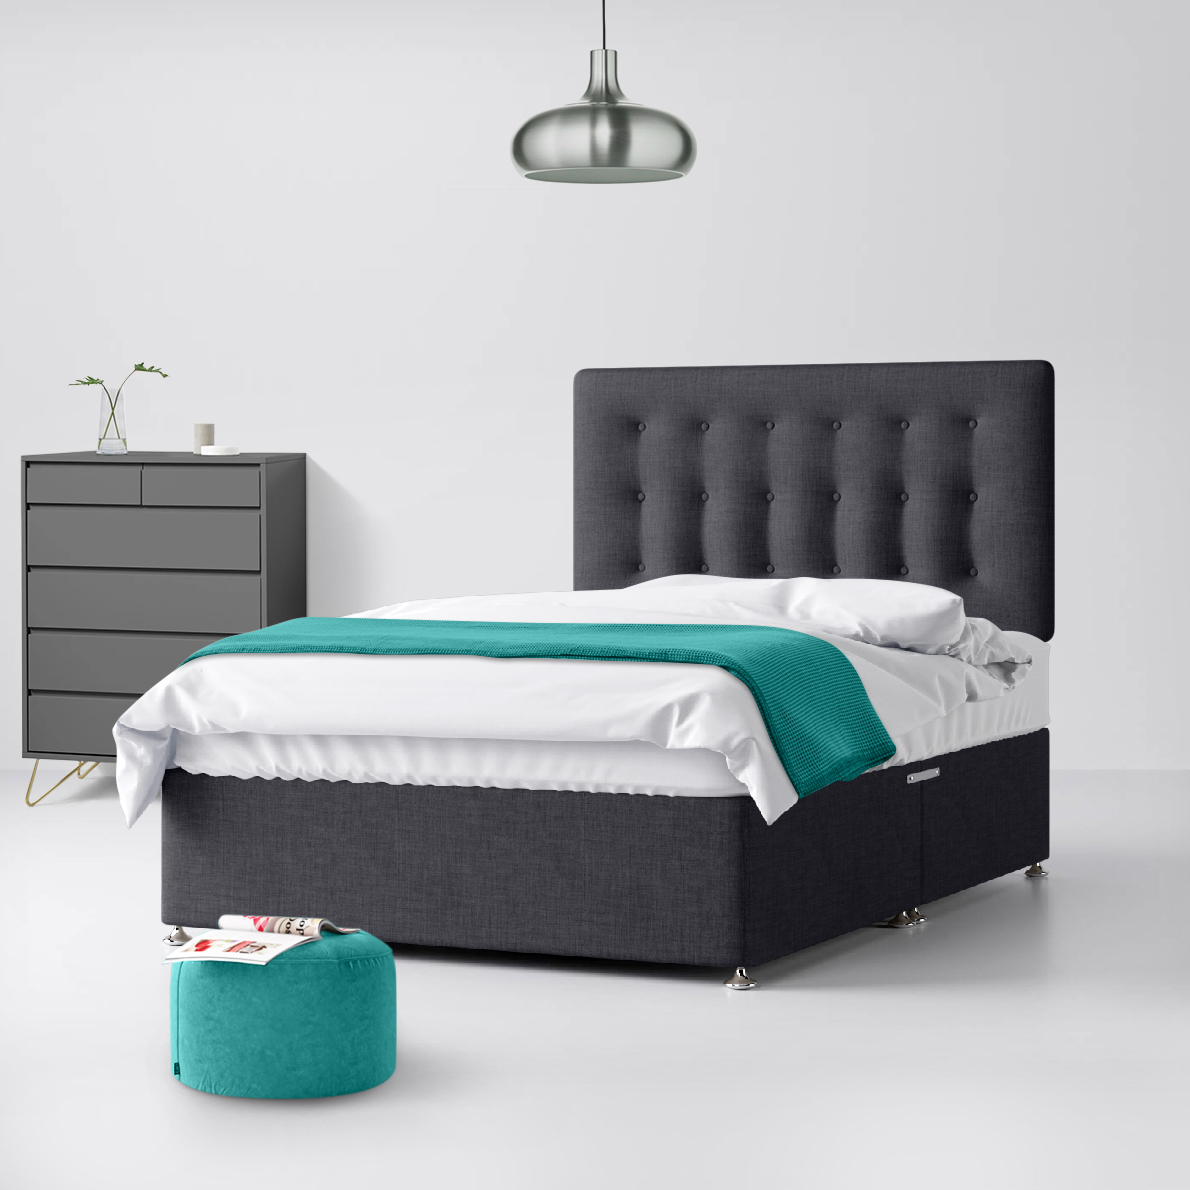 Super King Size - Divan Bed and Cornell Buttoned Headboard - Dark Grey - Charcoal - Fabric - 6ft - Happy Beds